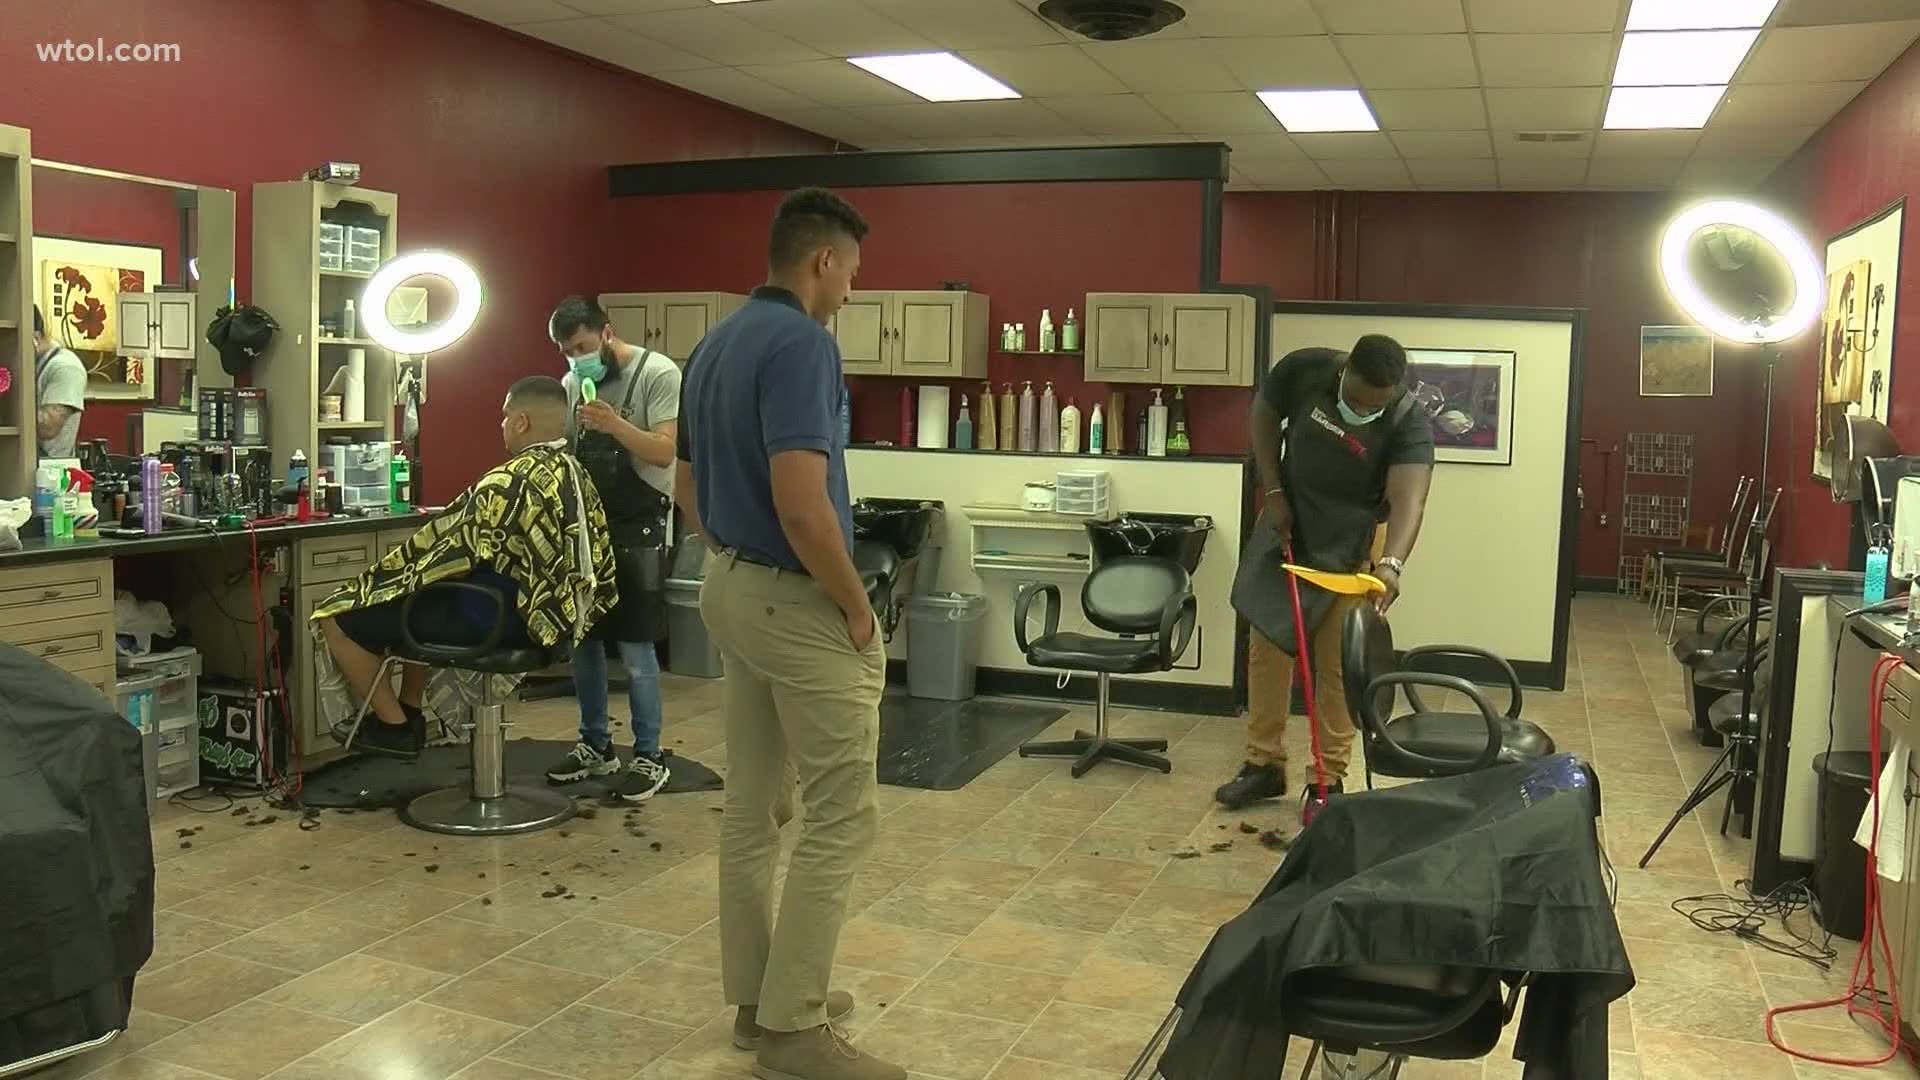 Damare Johnson is blazing a trail in Bowling Green as the first black-owned barbershop